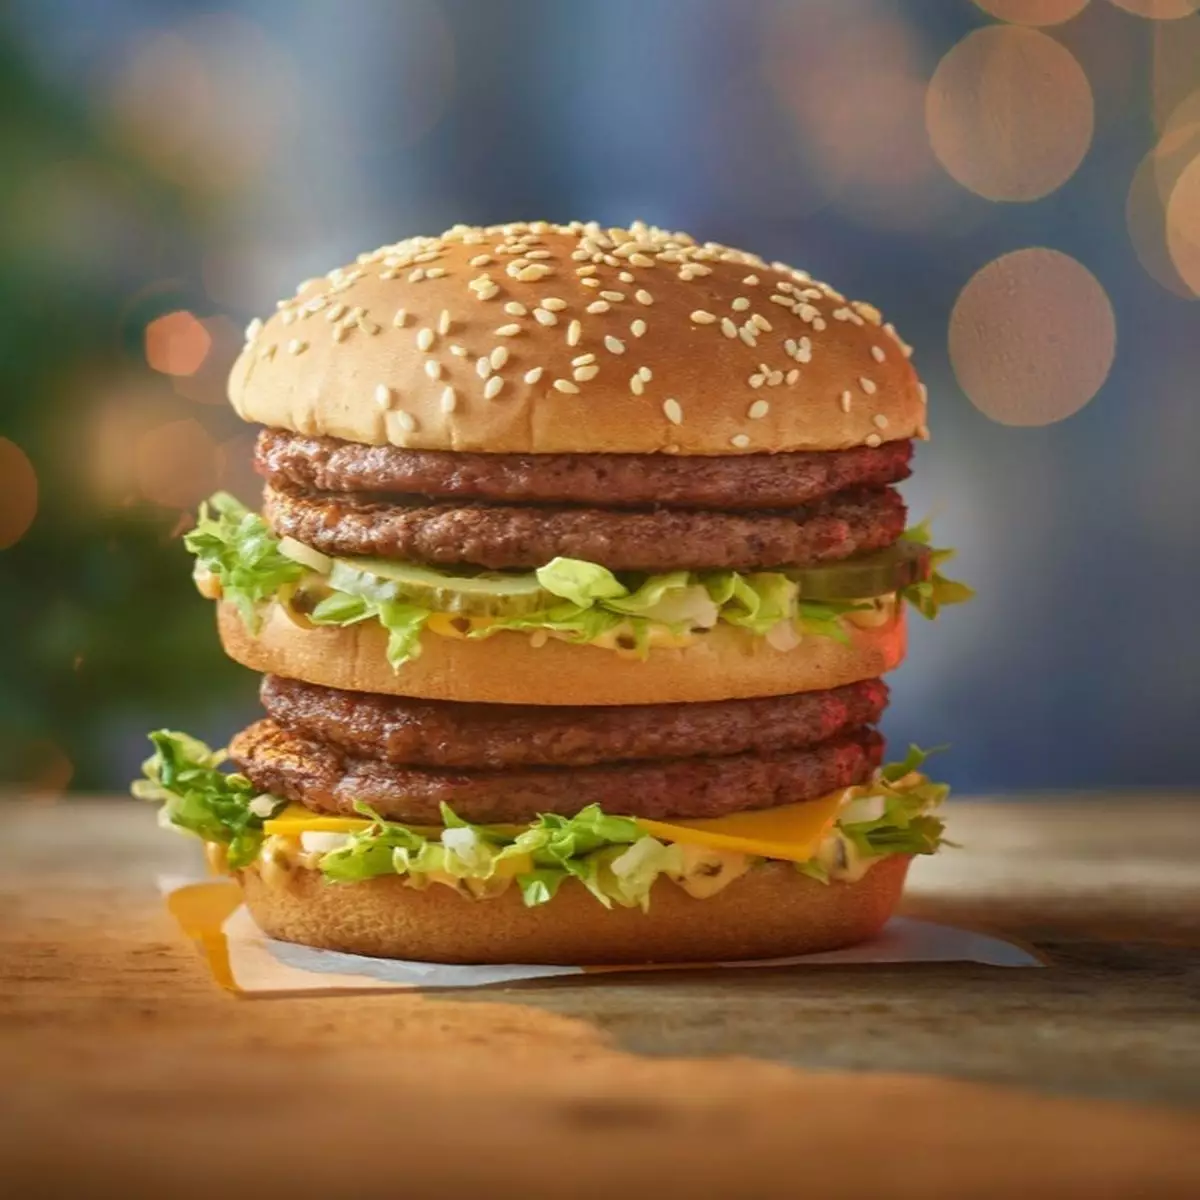 The Double Big Mac is available over Christmas (